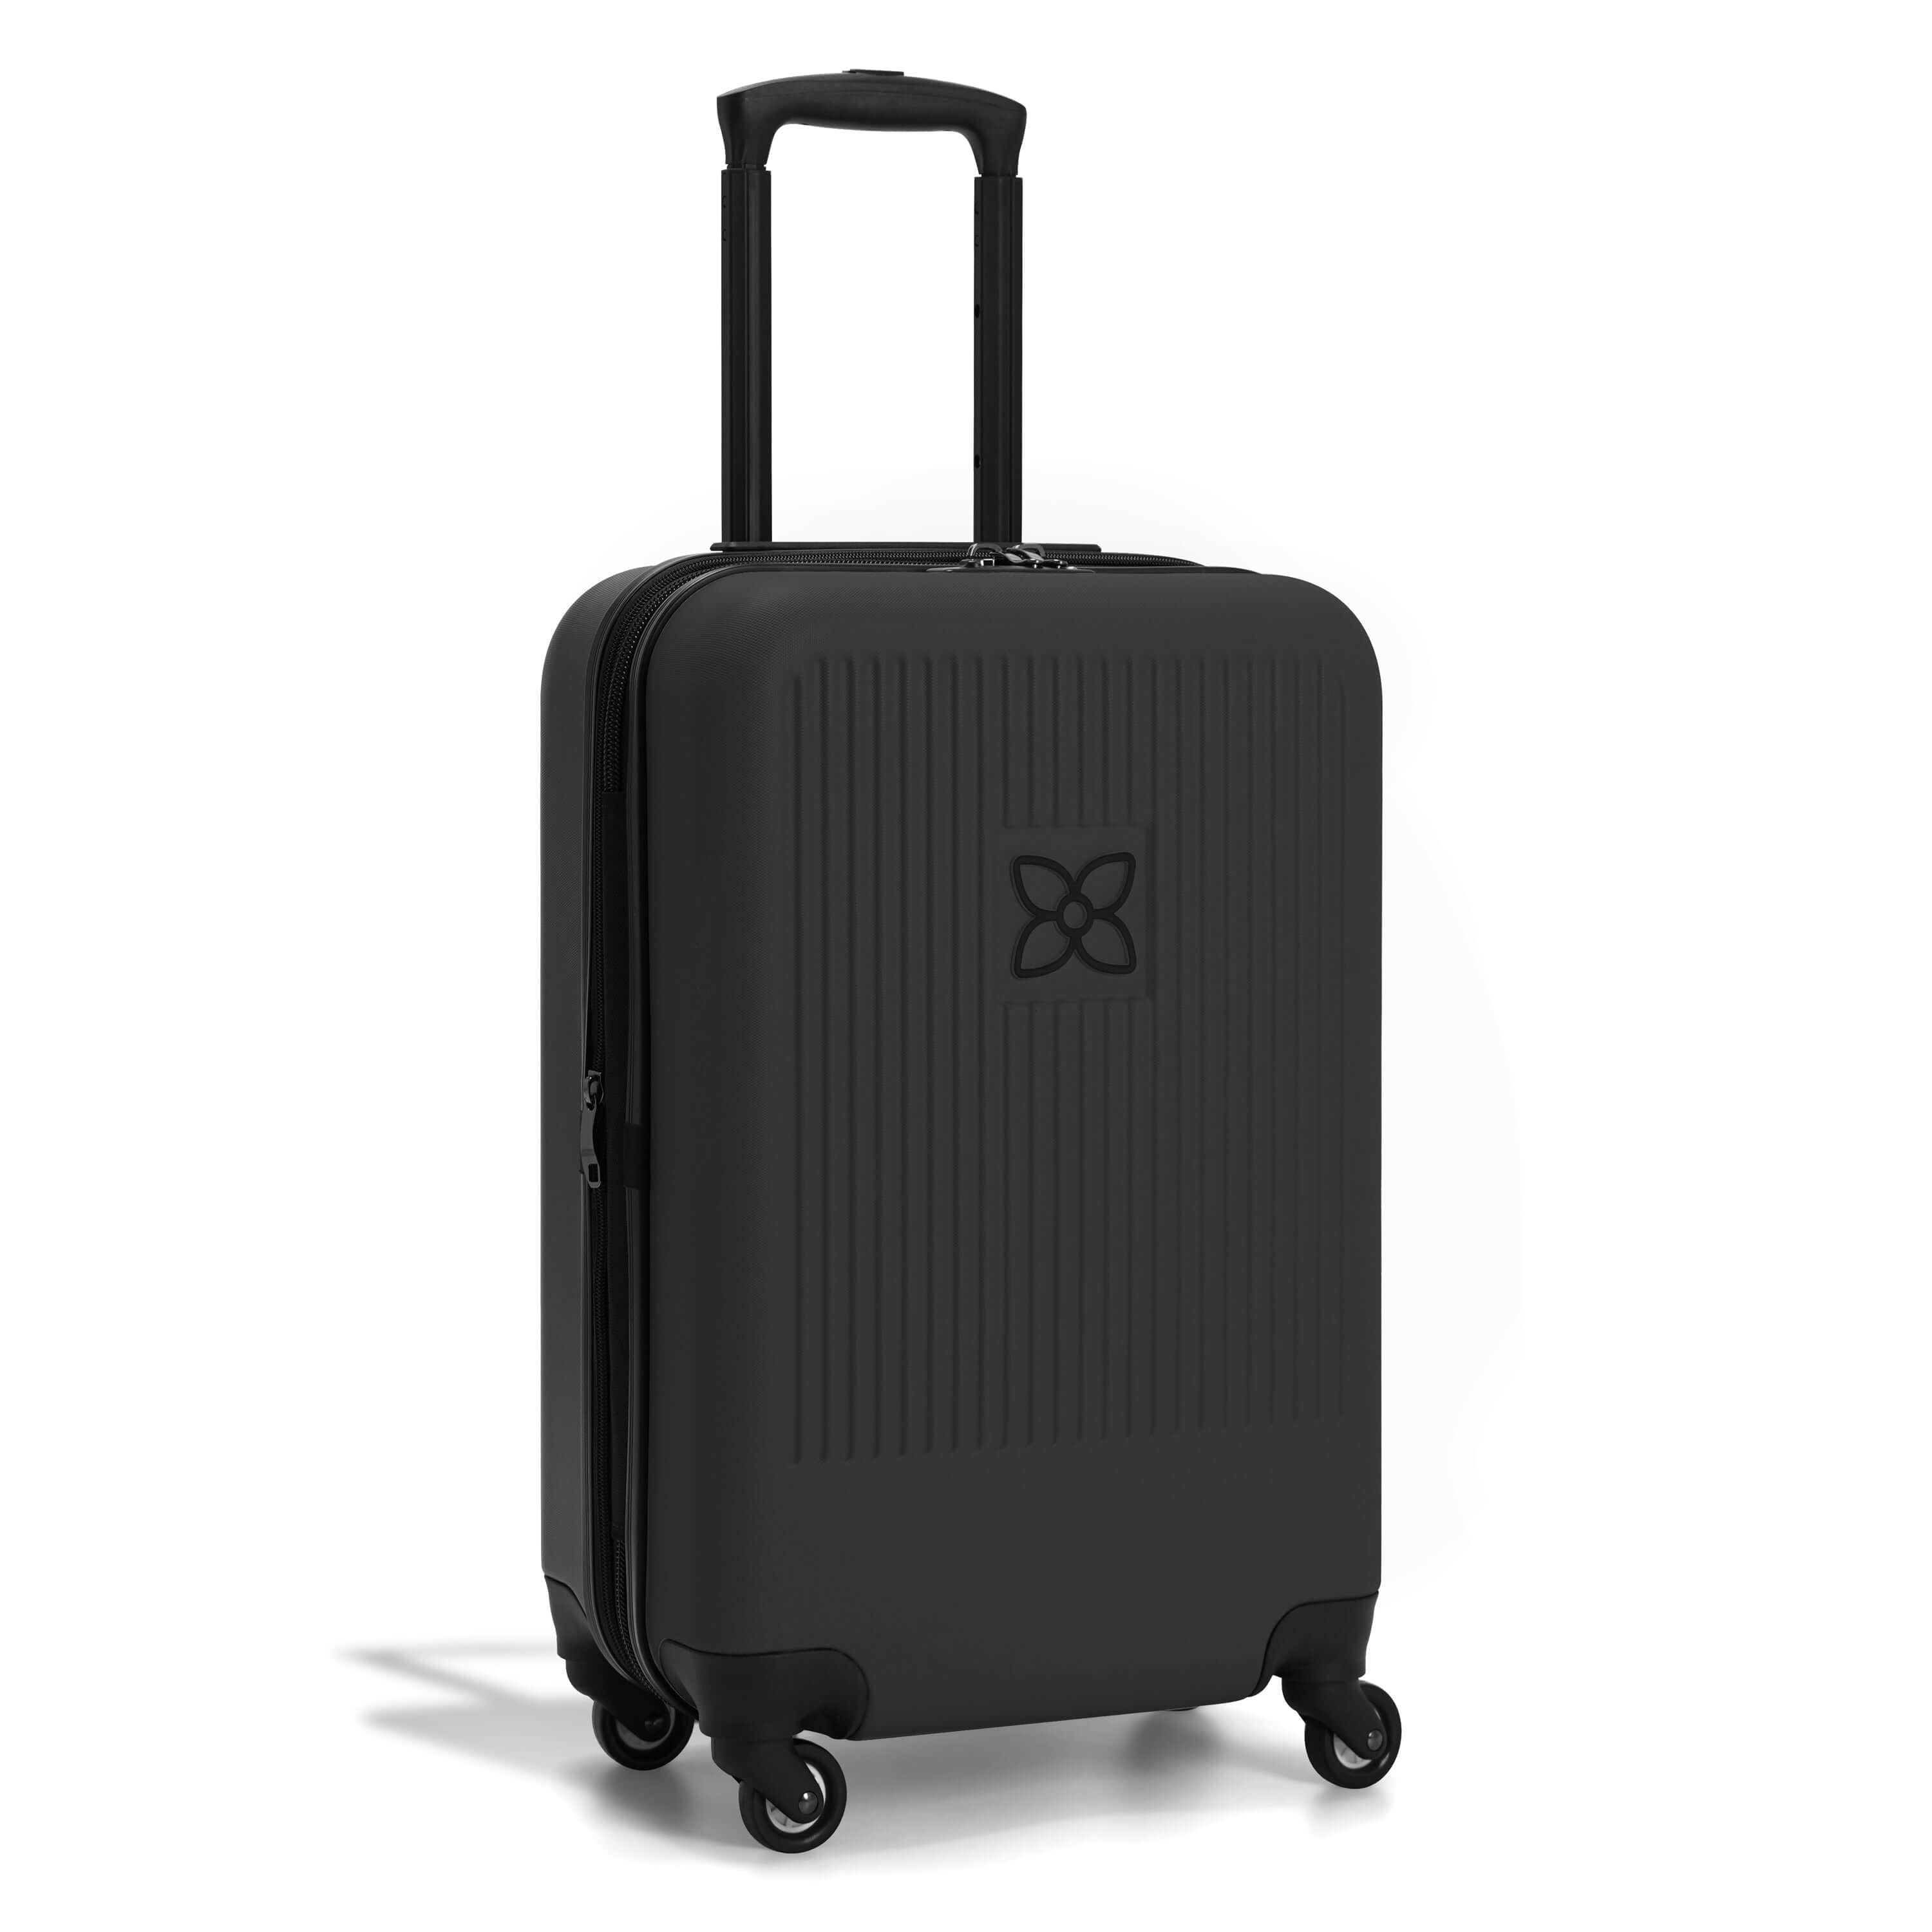 Angled front view of Sherpani hard-shell carry-on luggage, the Meridian in Black. Meridian features include a retractable luggage handle, uncrushable exterior, TSA-approved locking zippers and four 36-degree spinner wheels. #color_black